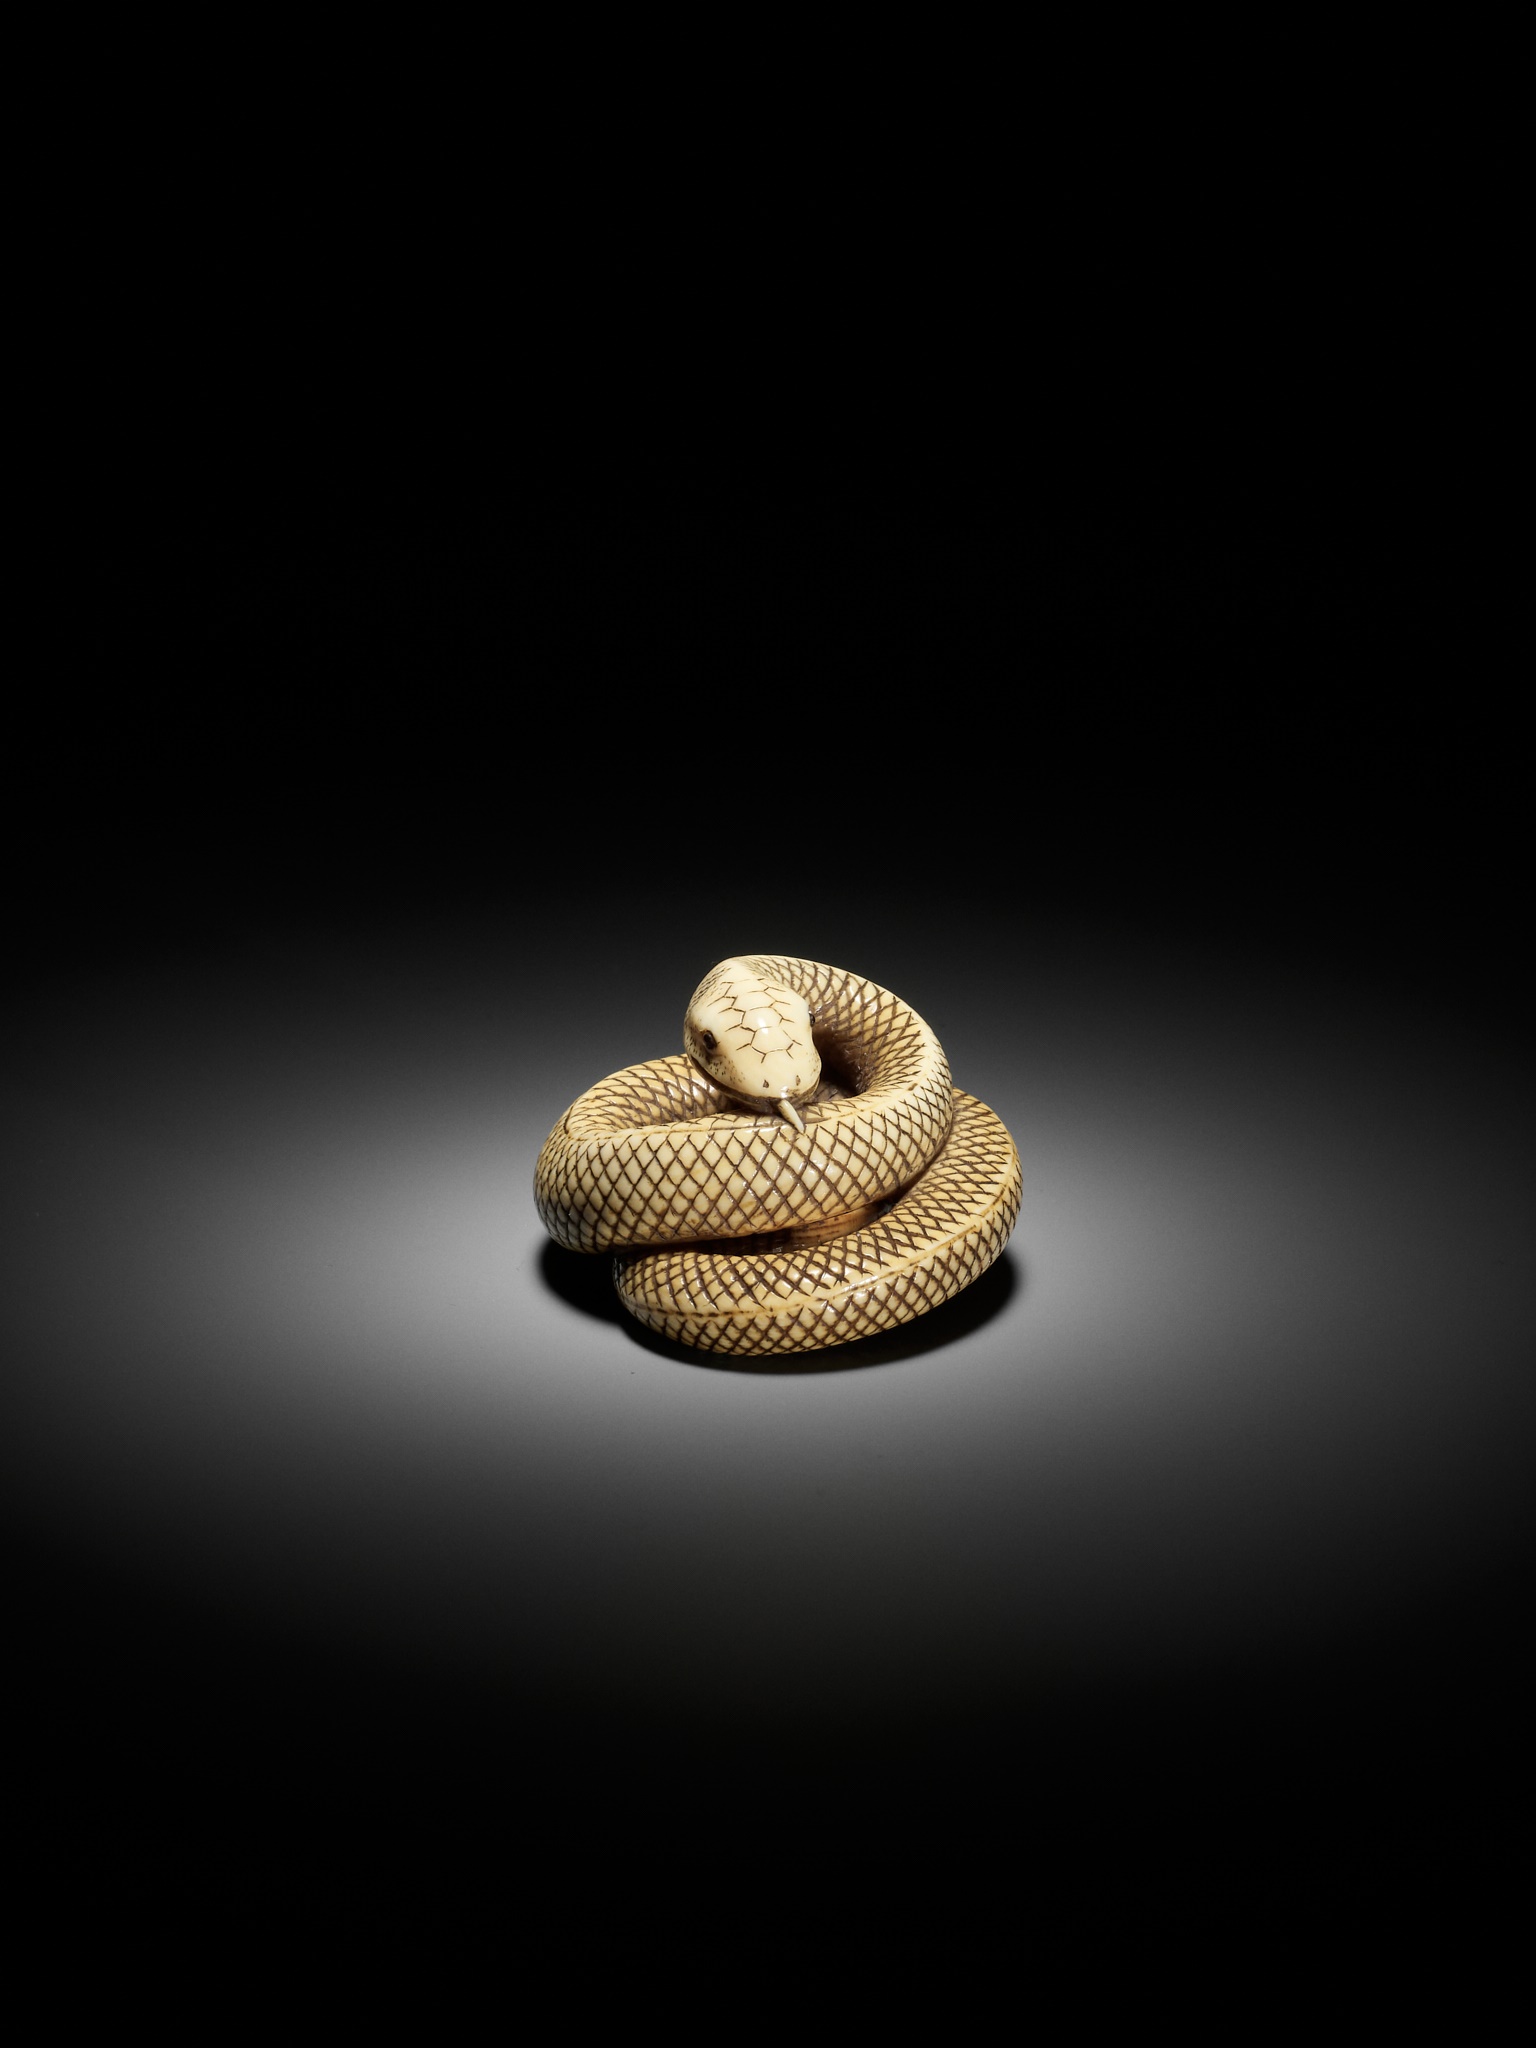 AN IVORY NETSUKE OF A COILED SNAKE, ATTRIBUTED TO OKATOMO - Image 13 of 16